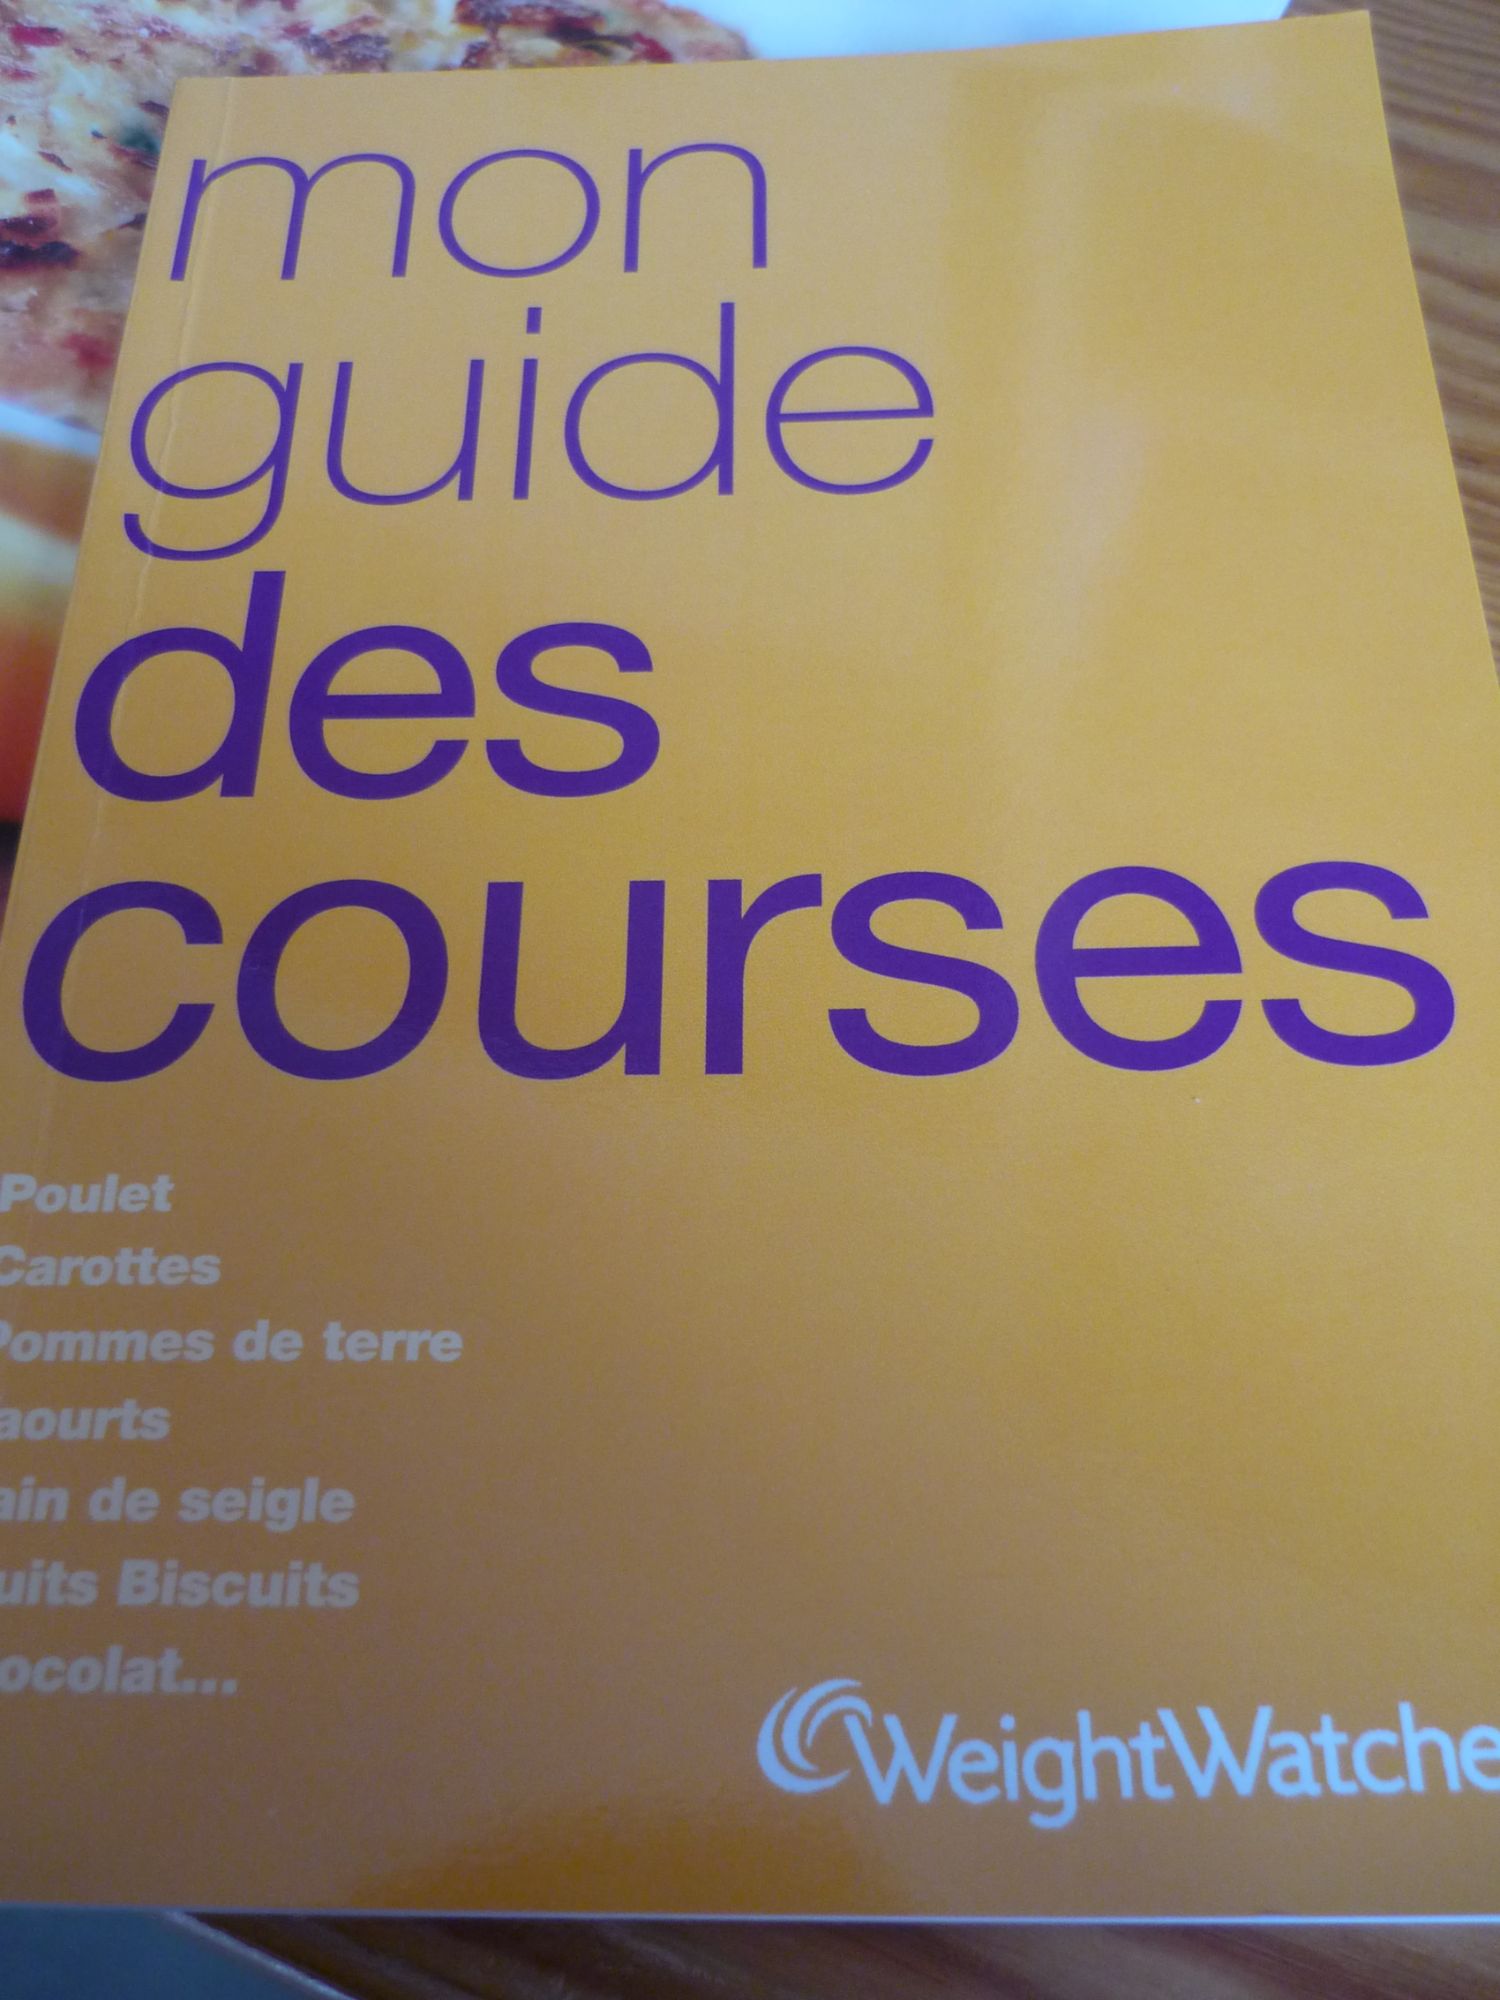 Mon guide des courses 2012 Weight Watchers